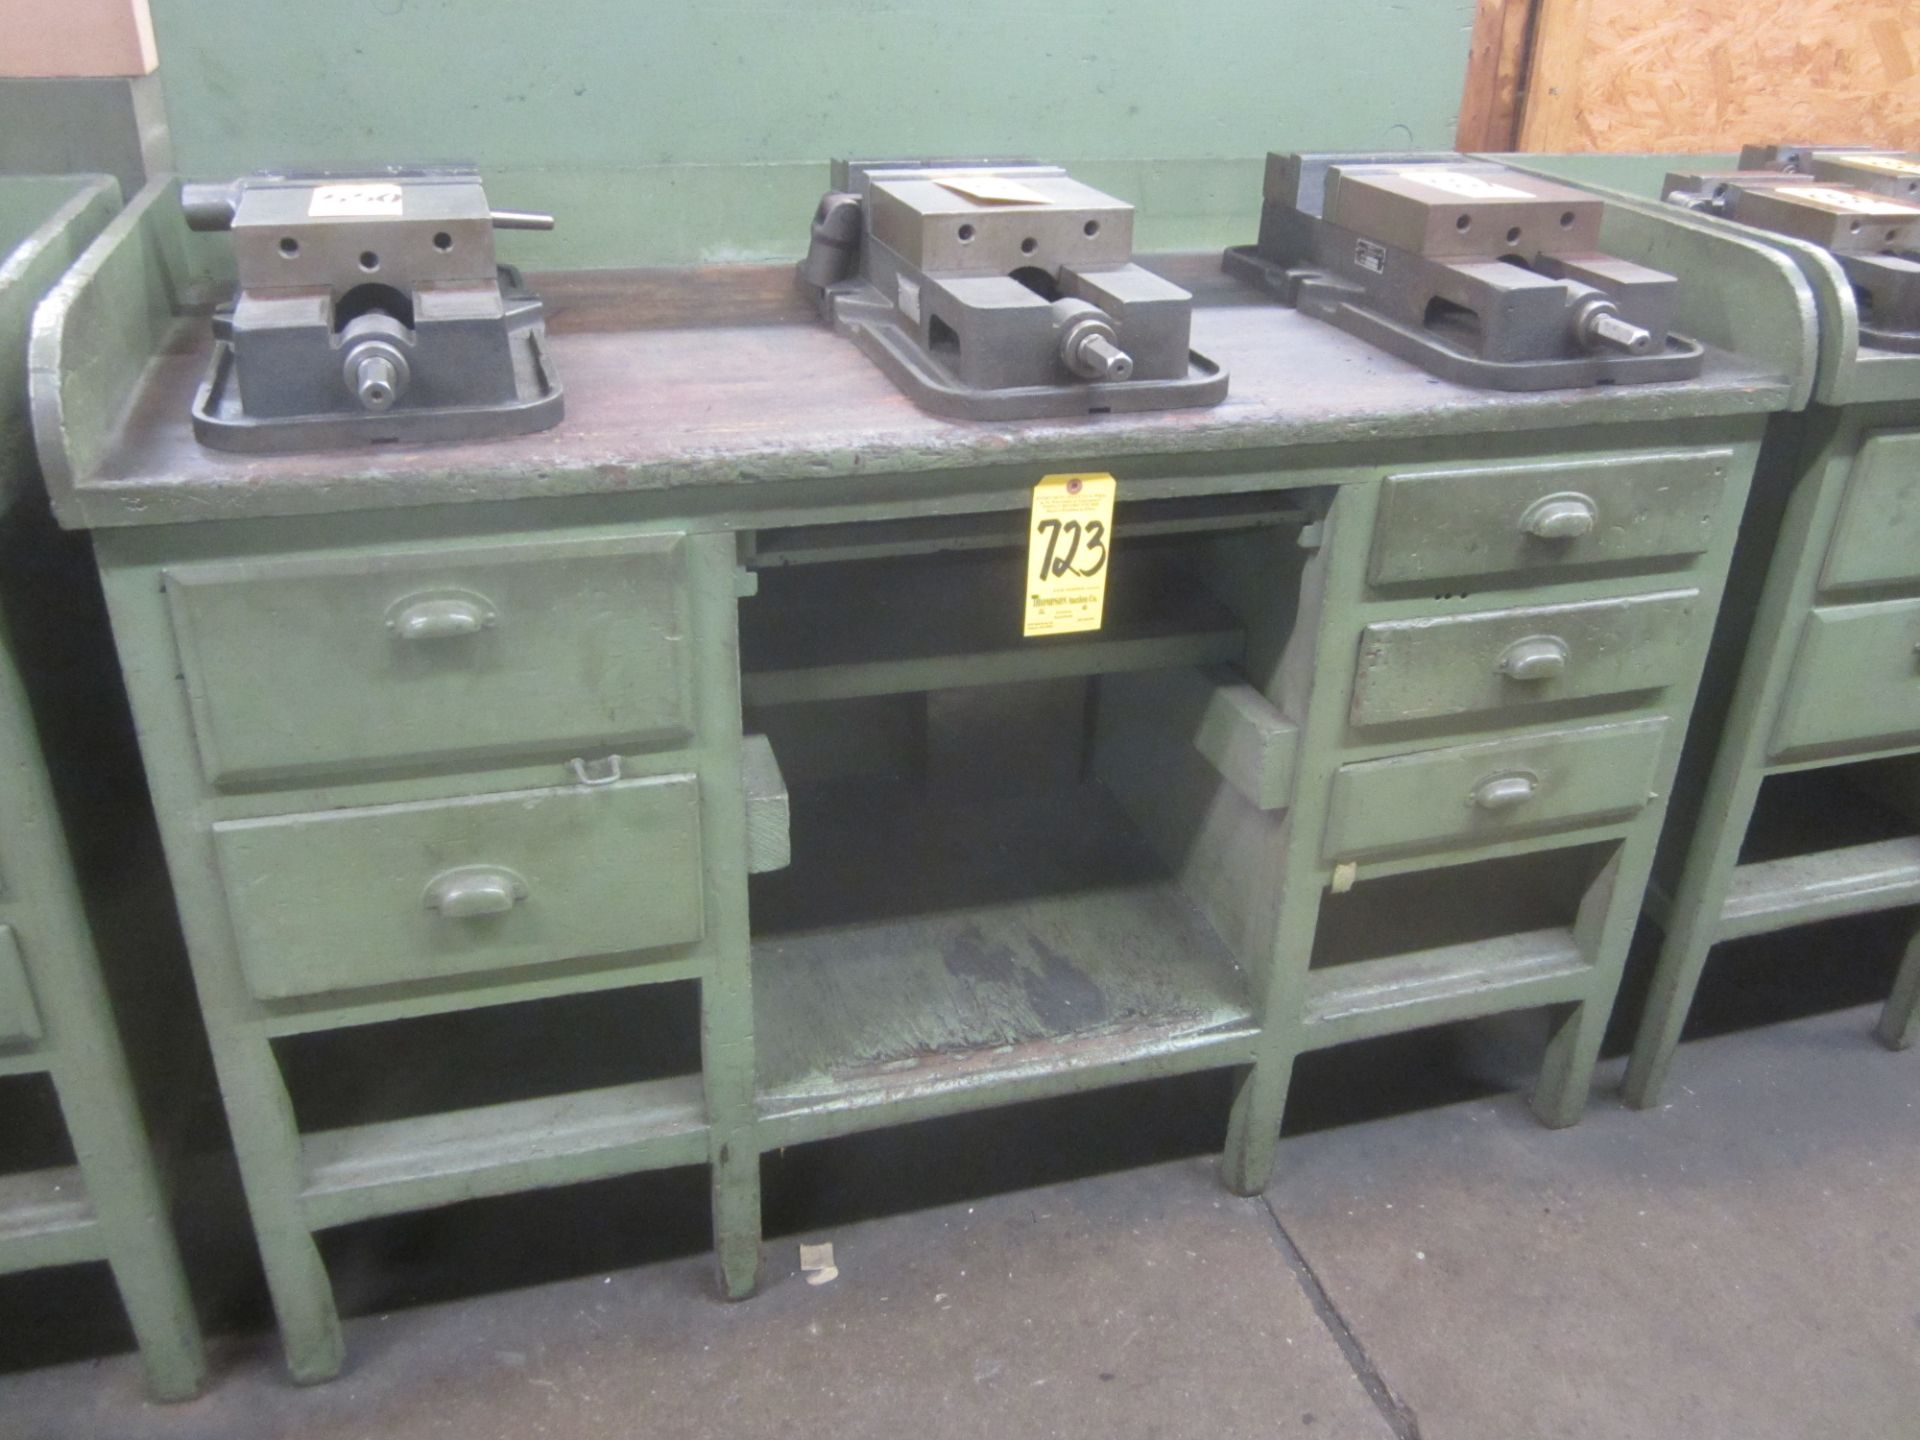 Wooden Toolmaker's Bench - No Contents in Photo